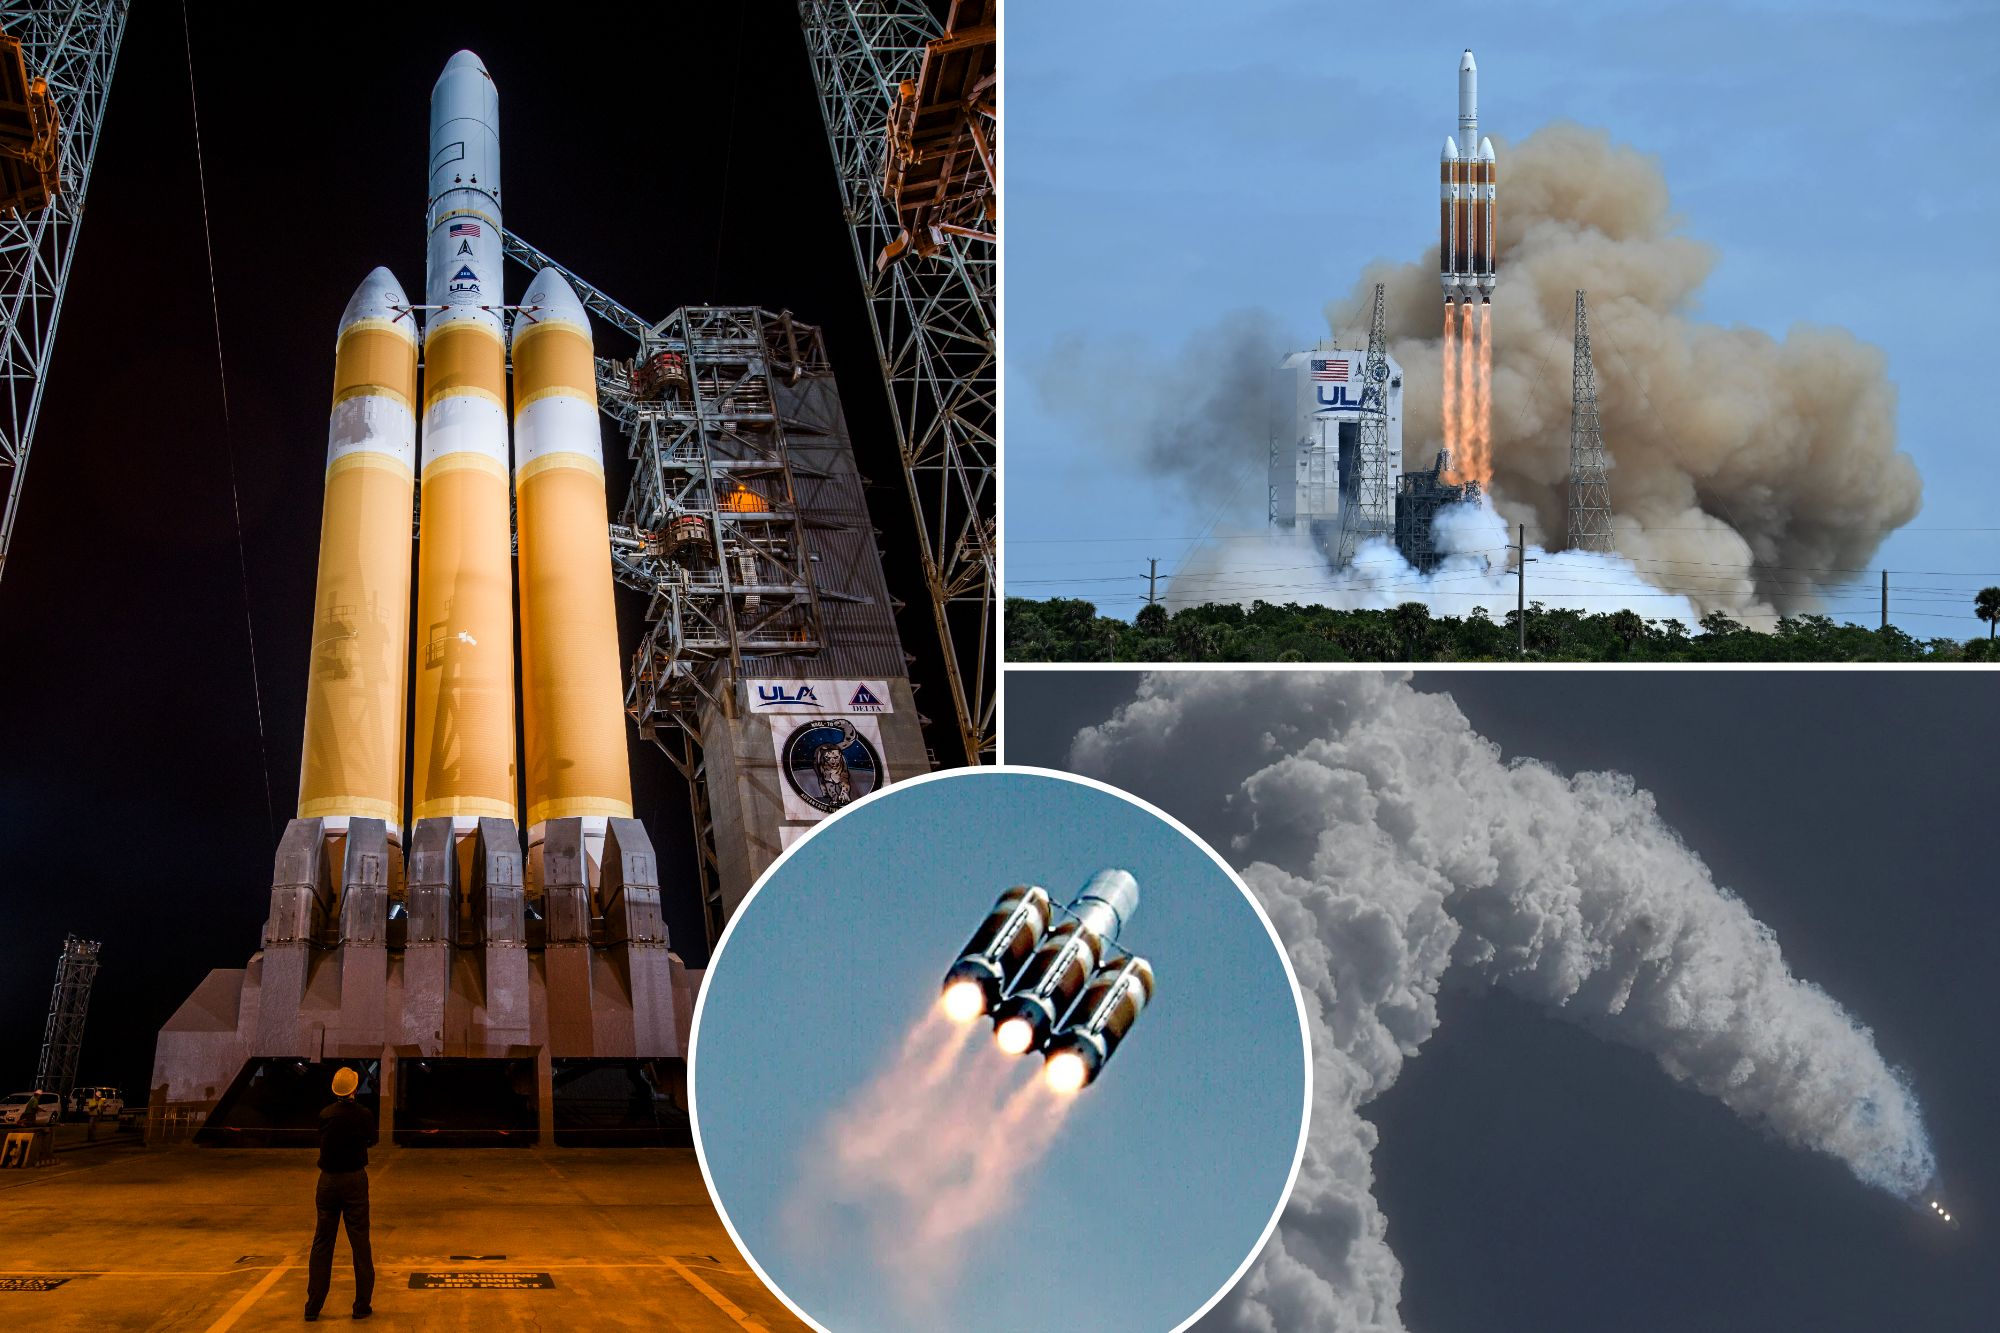 Delta IV Heavy rocket takes to the skies one last time in breathtaking launch